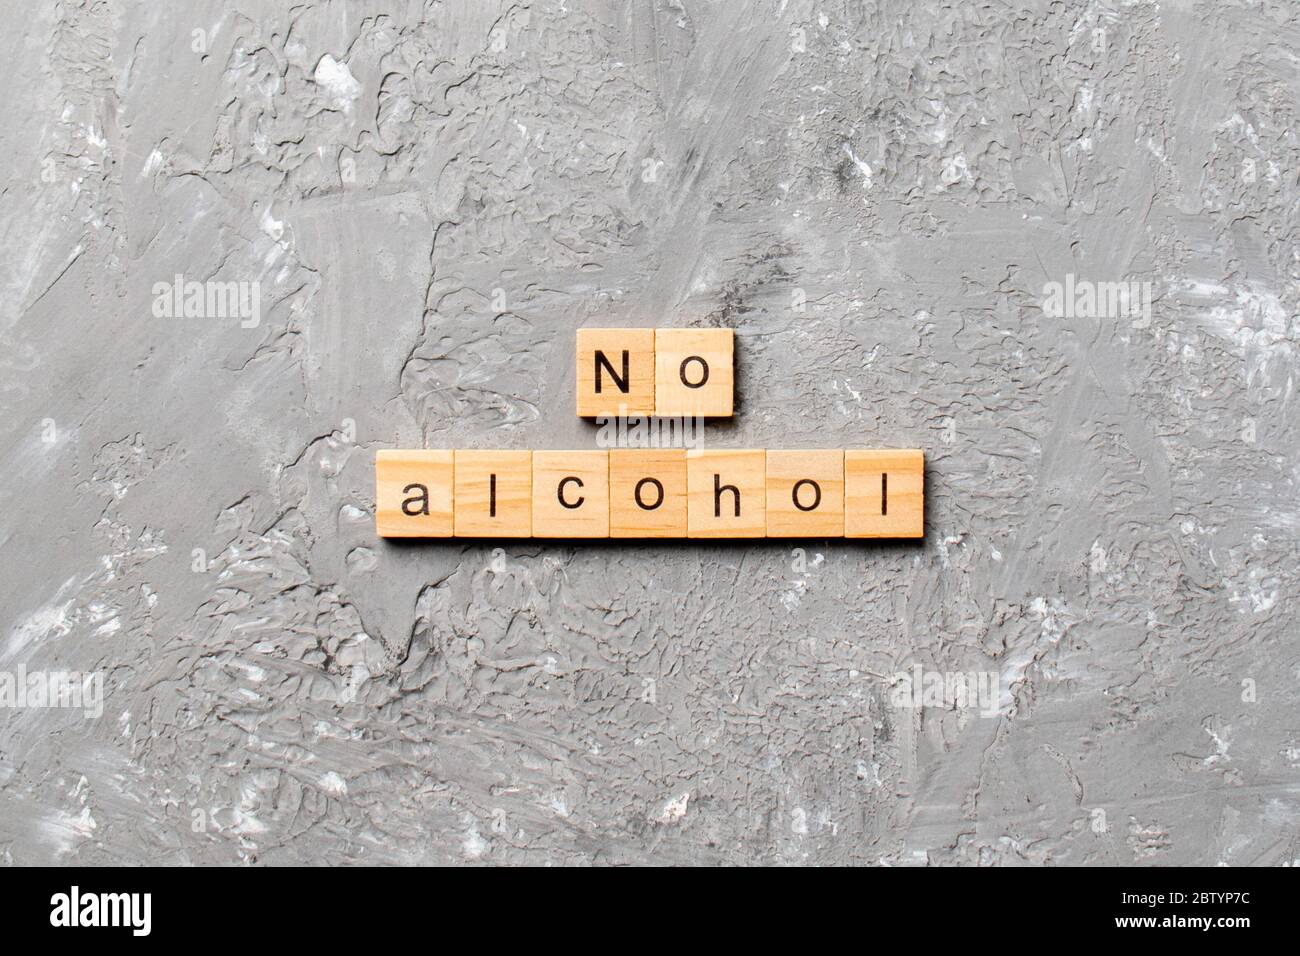 no-alcohol-word-written-on-wood-block-no-alcohol-text-on-cement-table